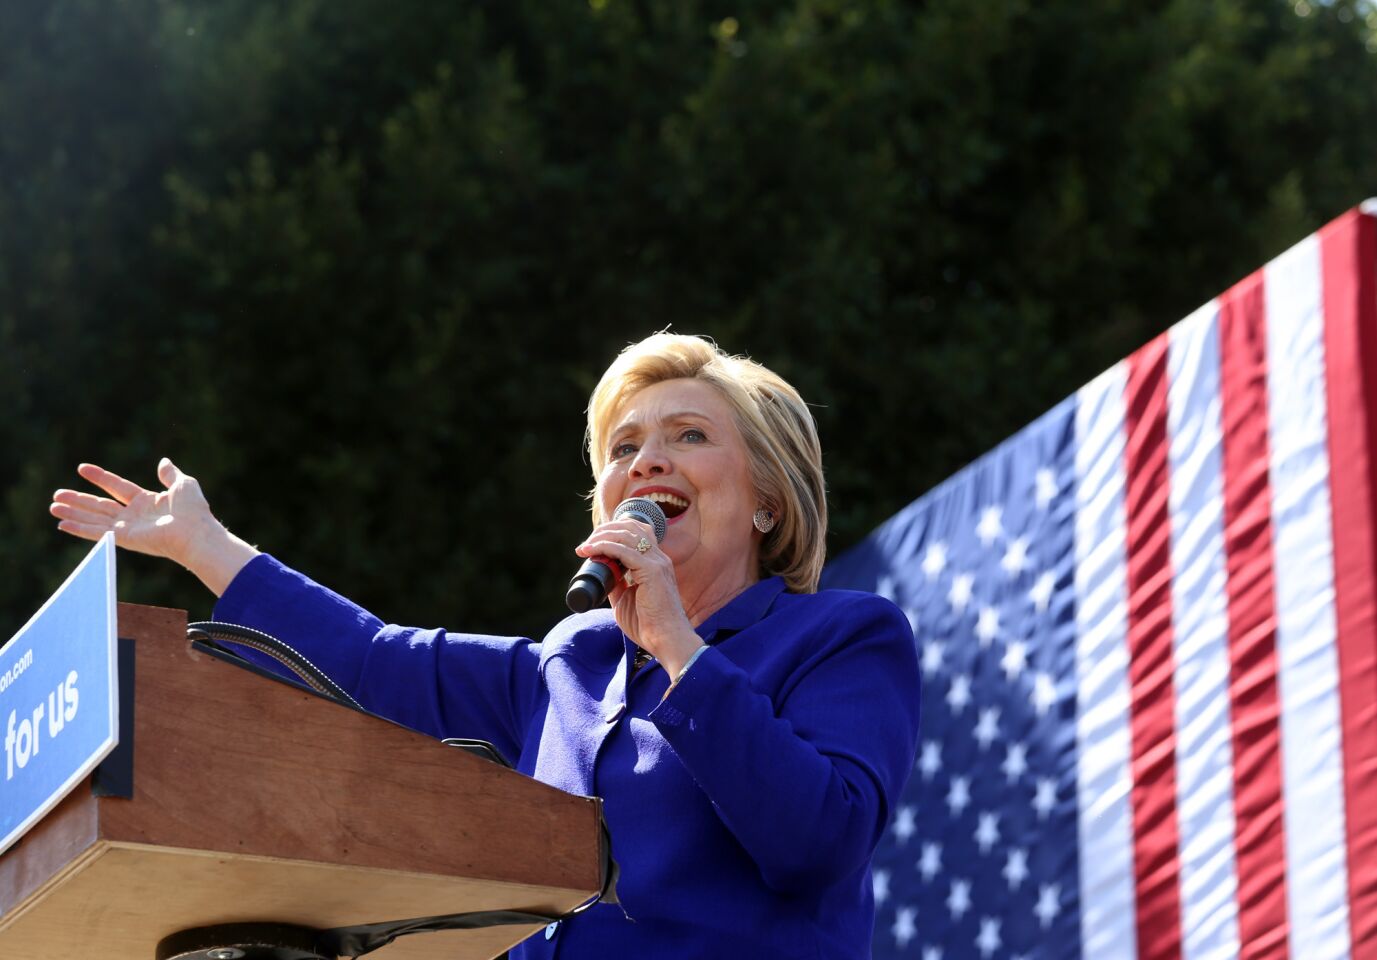 Democratic presidential candidate Hillary Clinton addresses supporters in the Los Angeles neighborhood of Leimert Park.